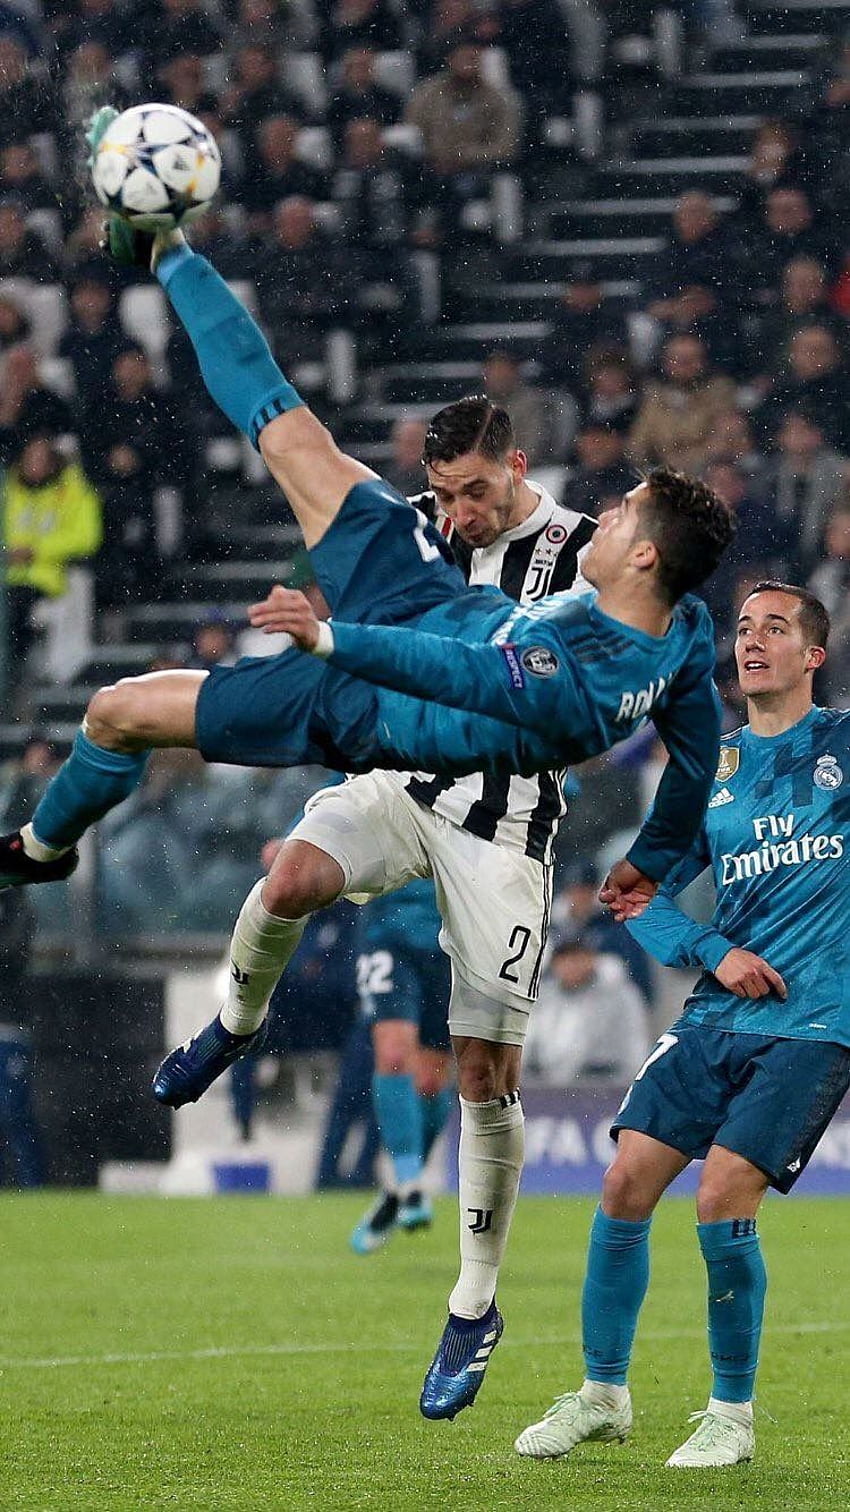 Ronaldo's breathtaking bicycle kick against Juventus, which was followed by an overwhelming standing. Ronaldo goals, Cristiano ronaldo juventus, Ronaldo football, Cristiano Ronaldo Goal HD phone wallpaper